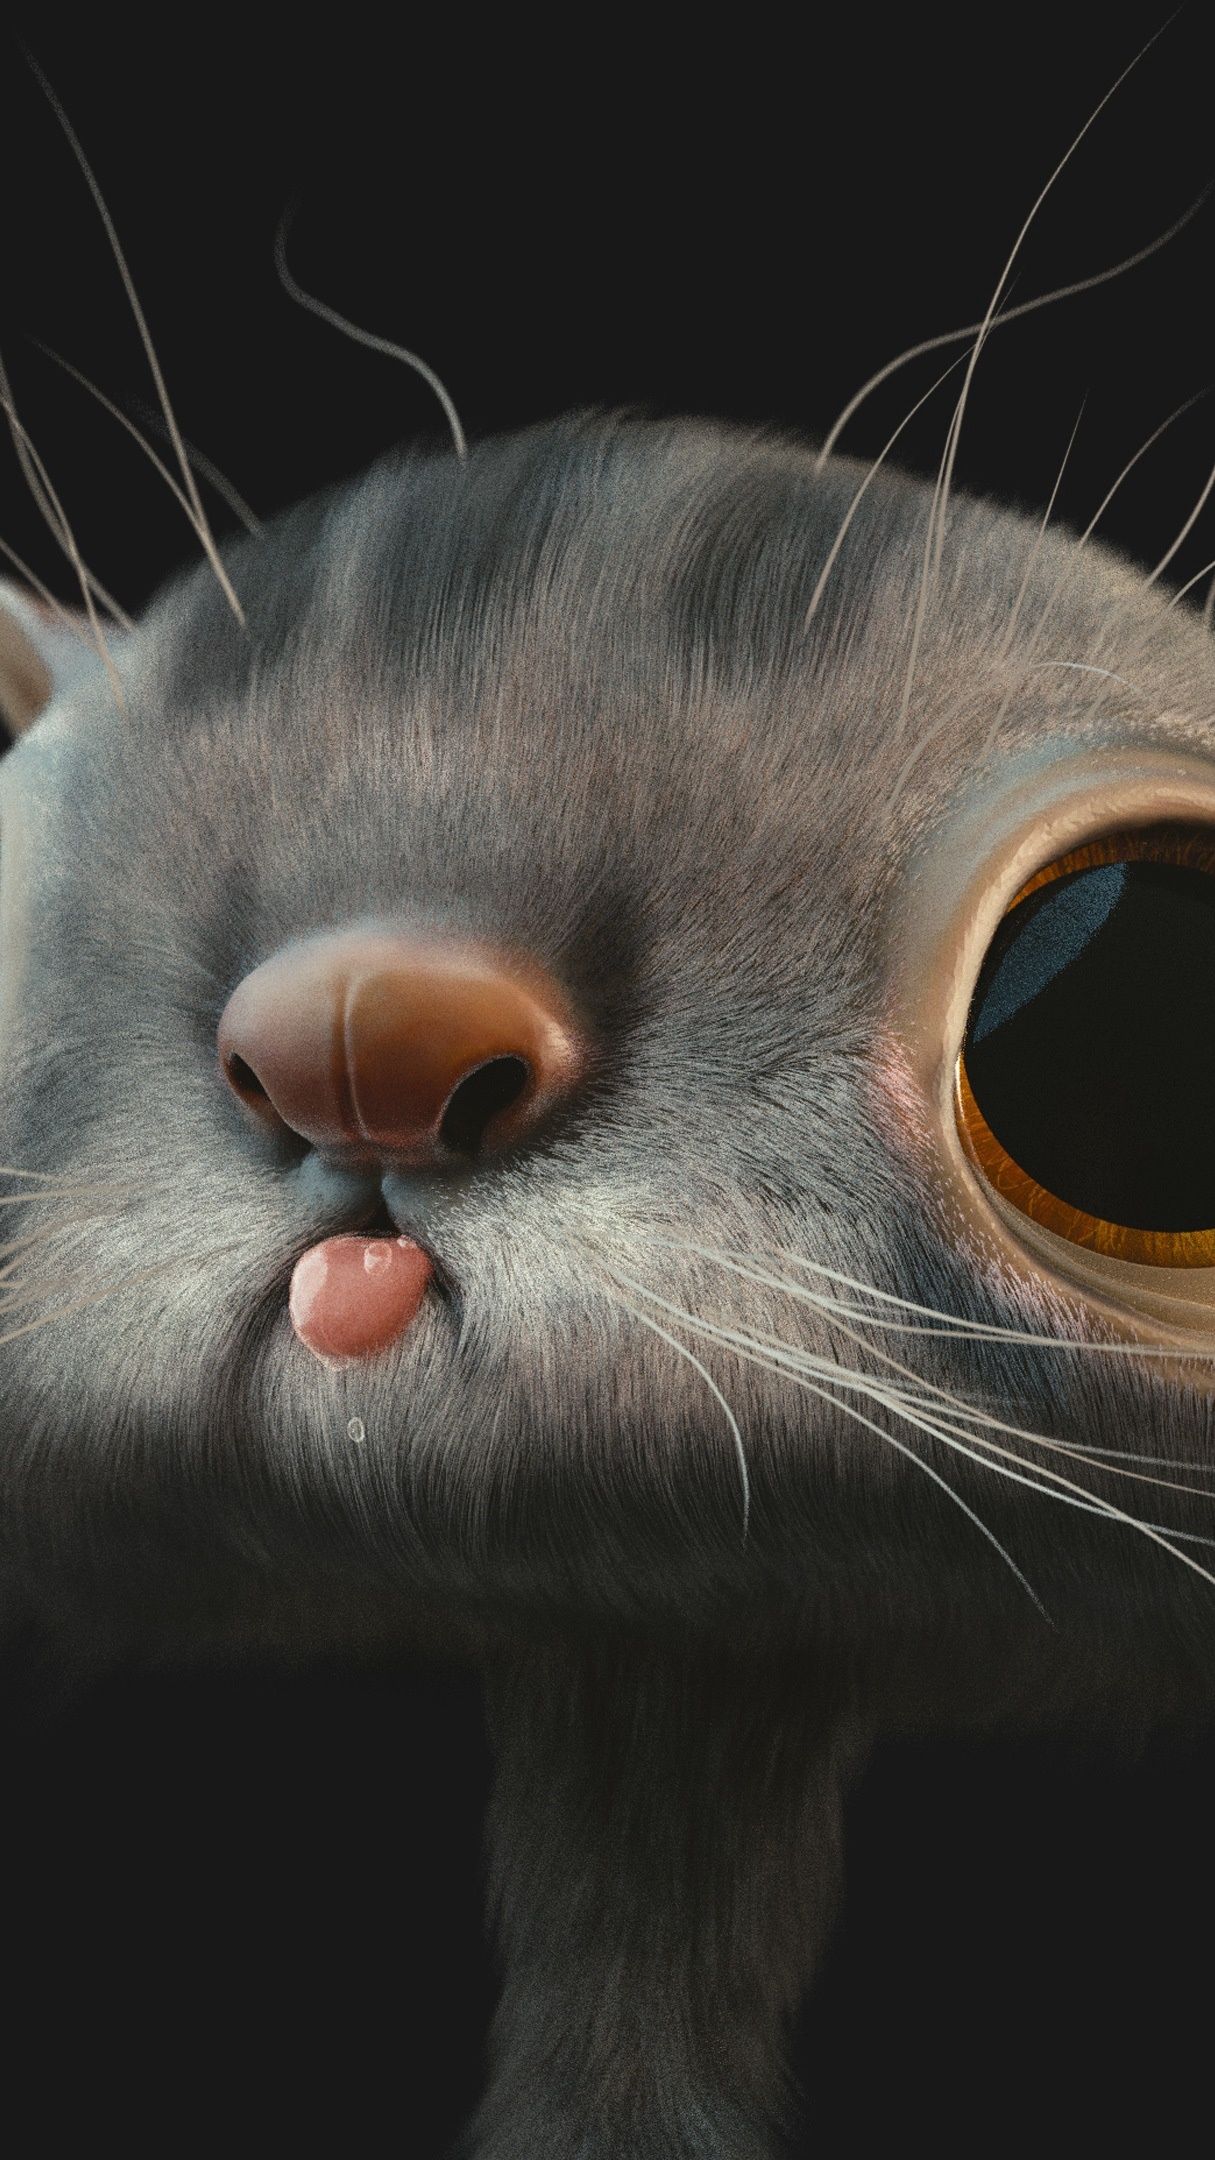 3D cartoon cat with big eyes wallpaper - backiee